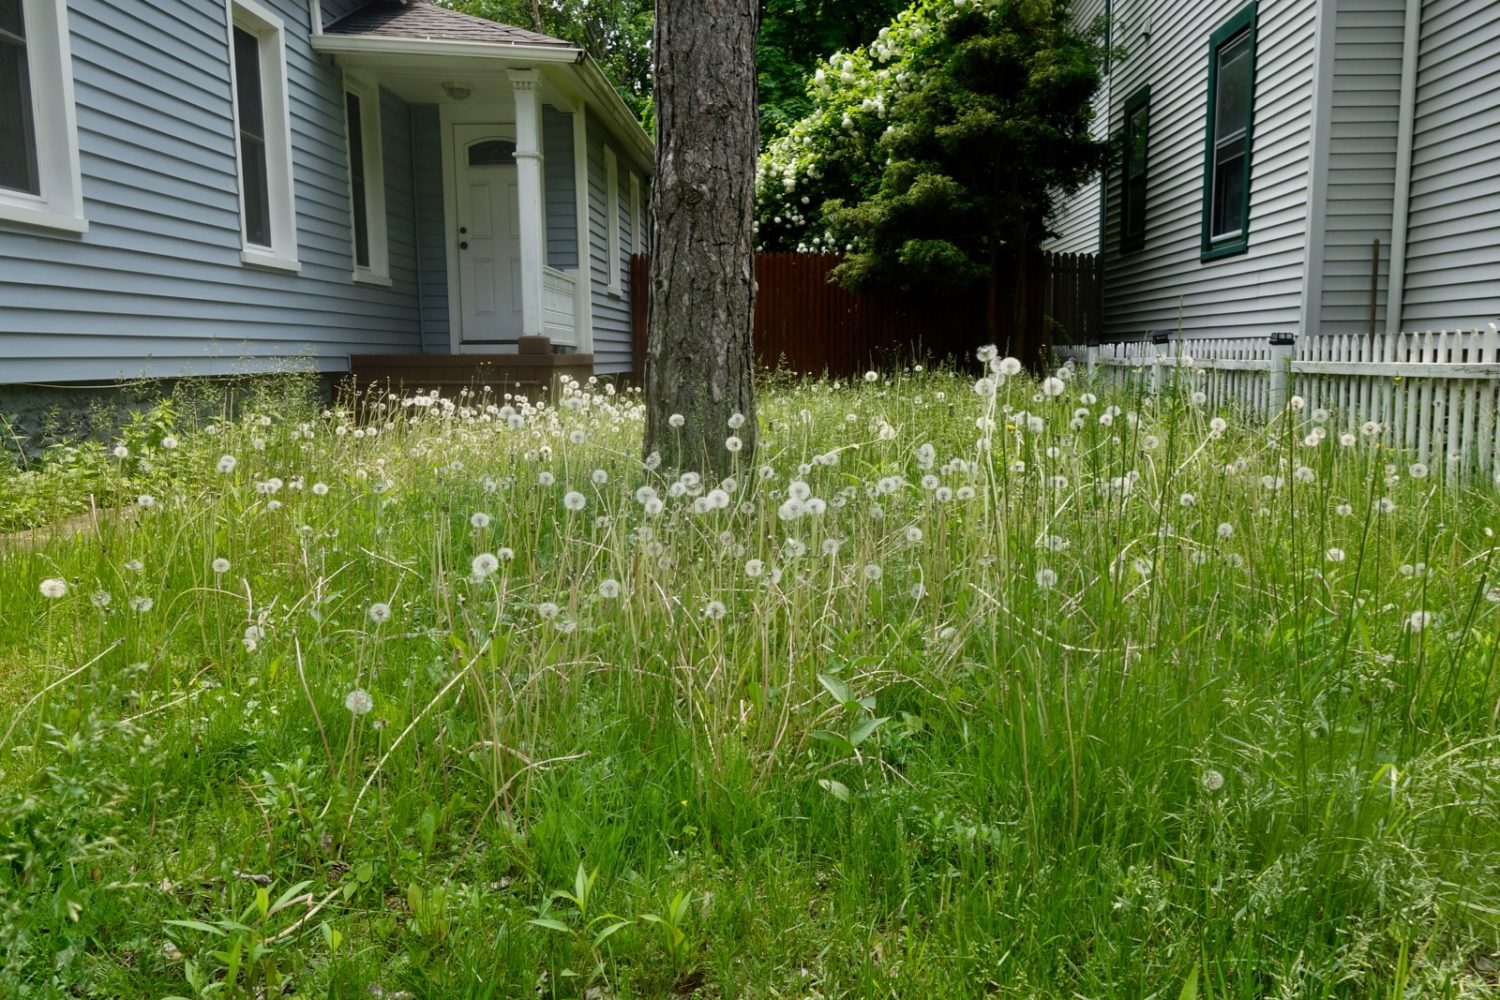 Dandelions in the South Wedge neighborhood of Rochester, New York